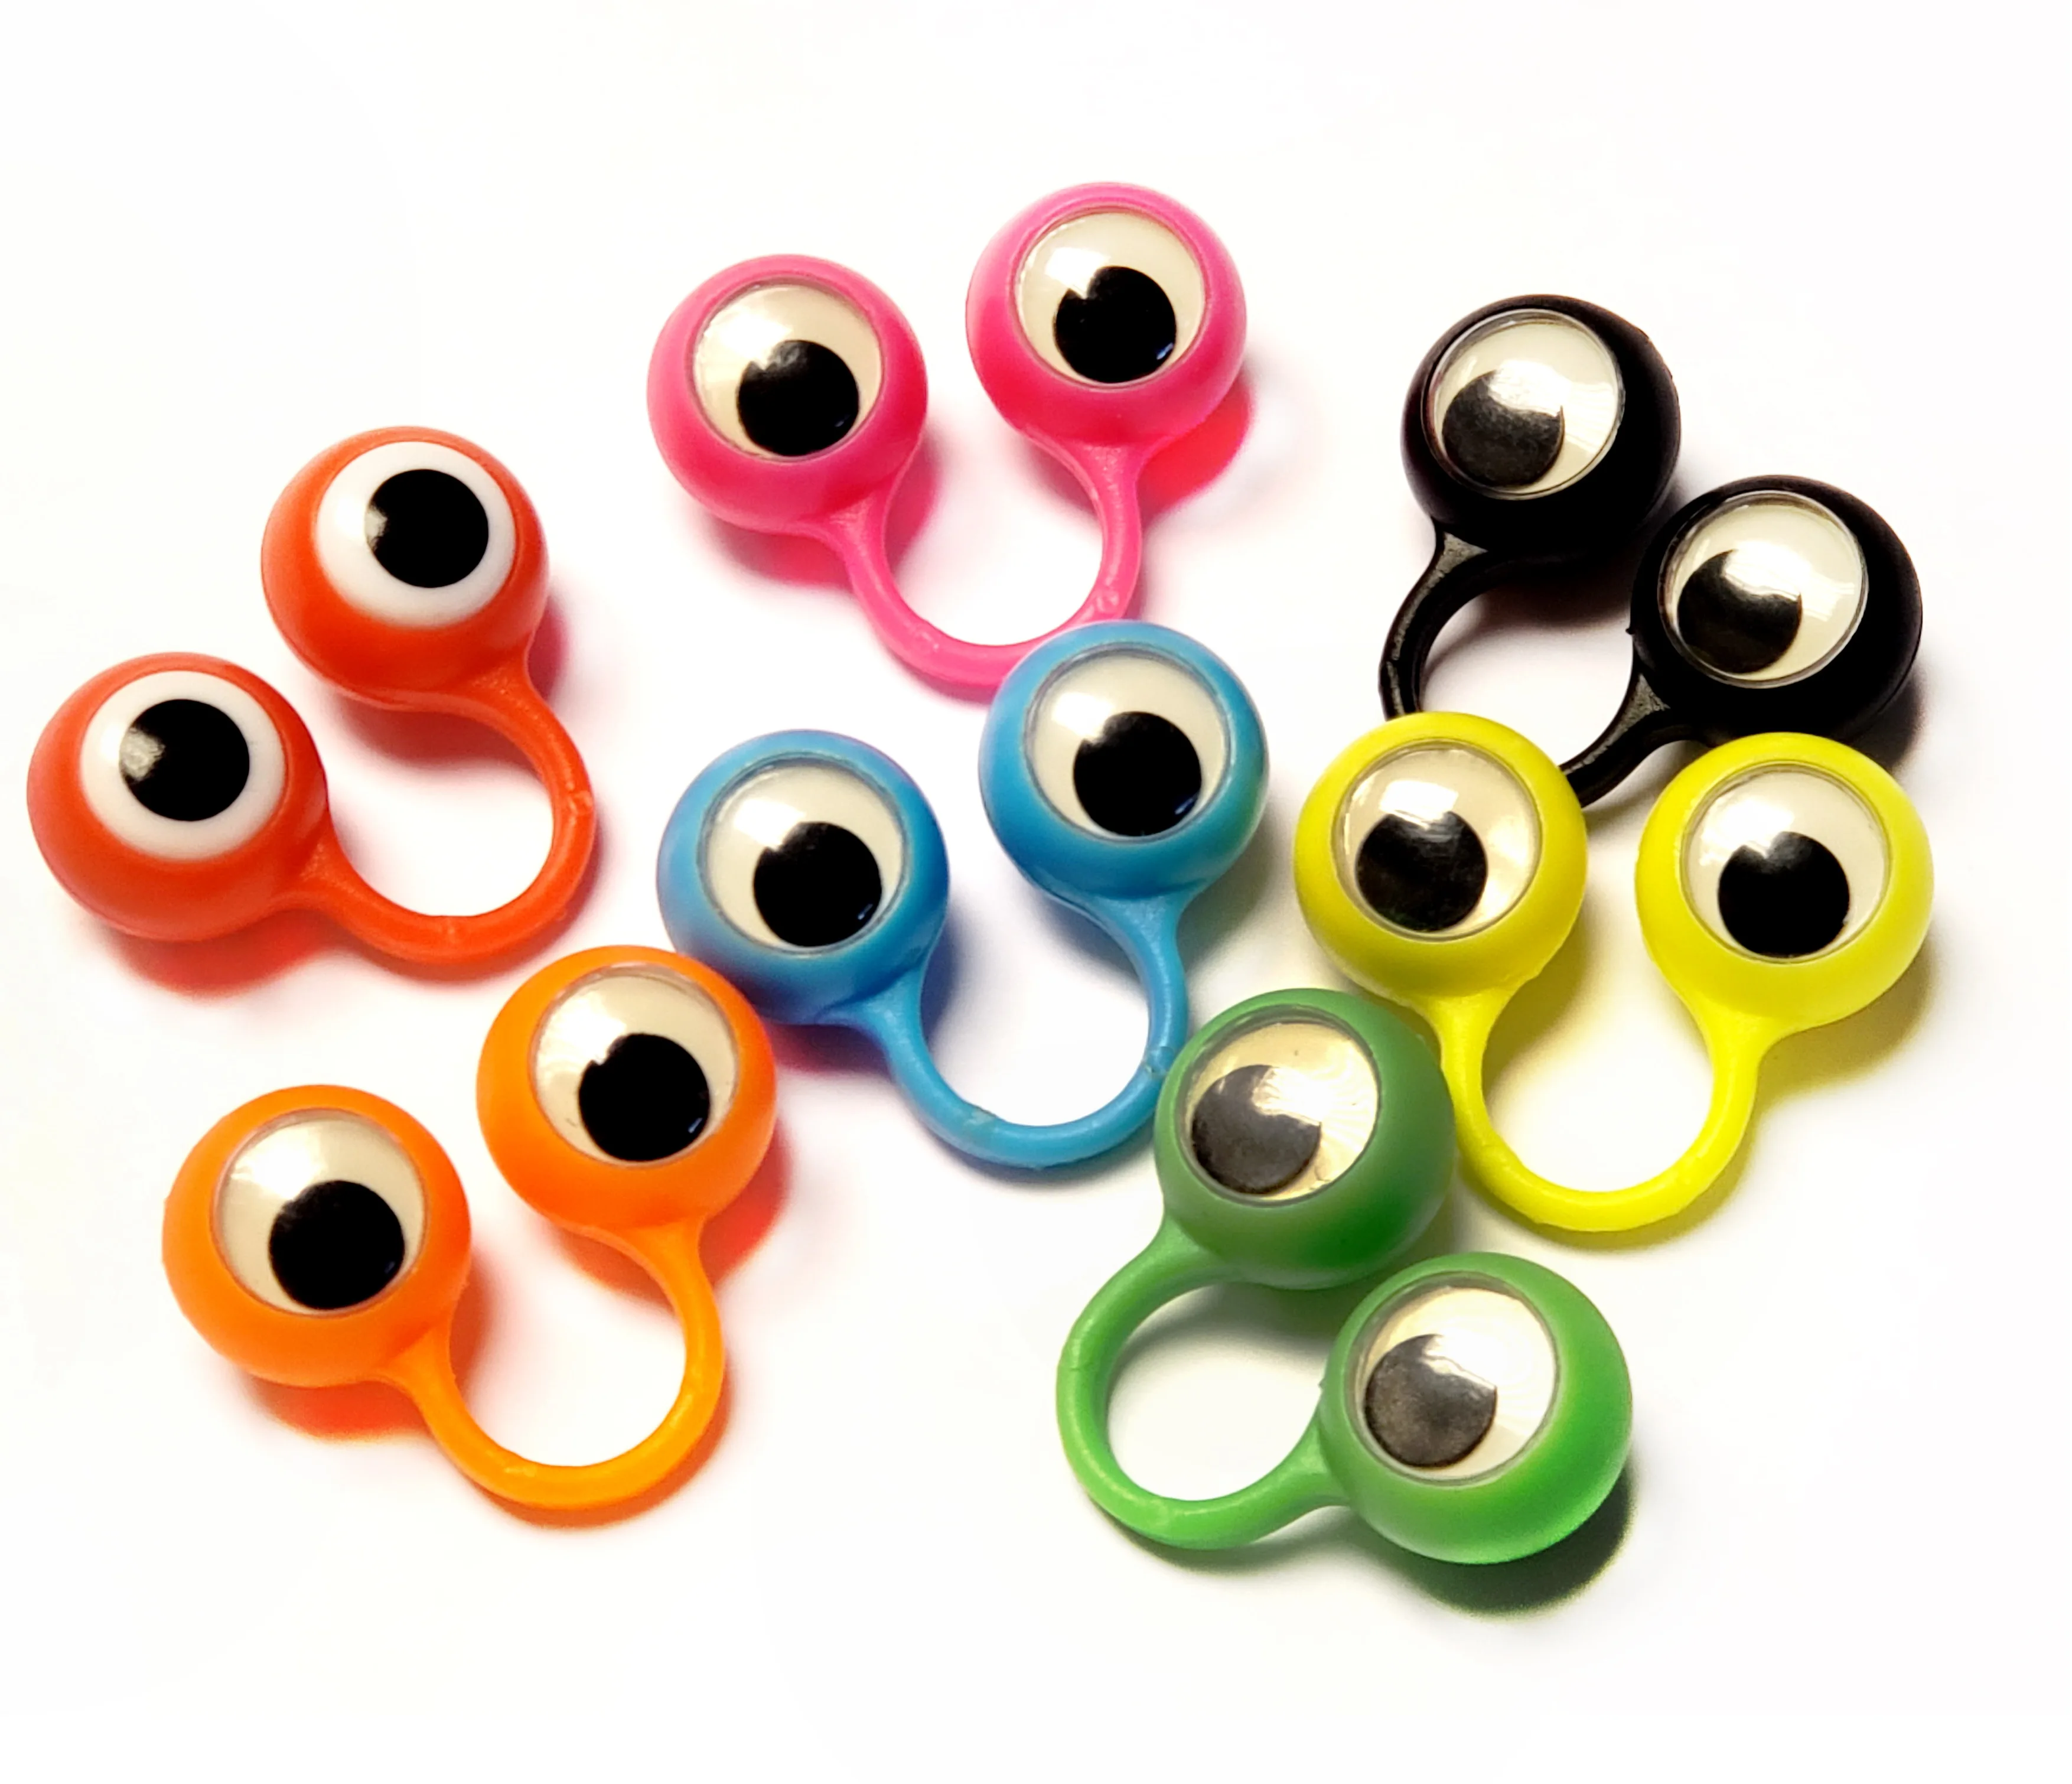 

1-4Piece Finger Eye Googily Eyes Puppets Kids Birthday Party Favours School Game Pinata Toys Favors Prize Gift Loot Bag Gag